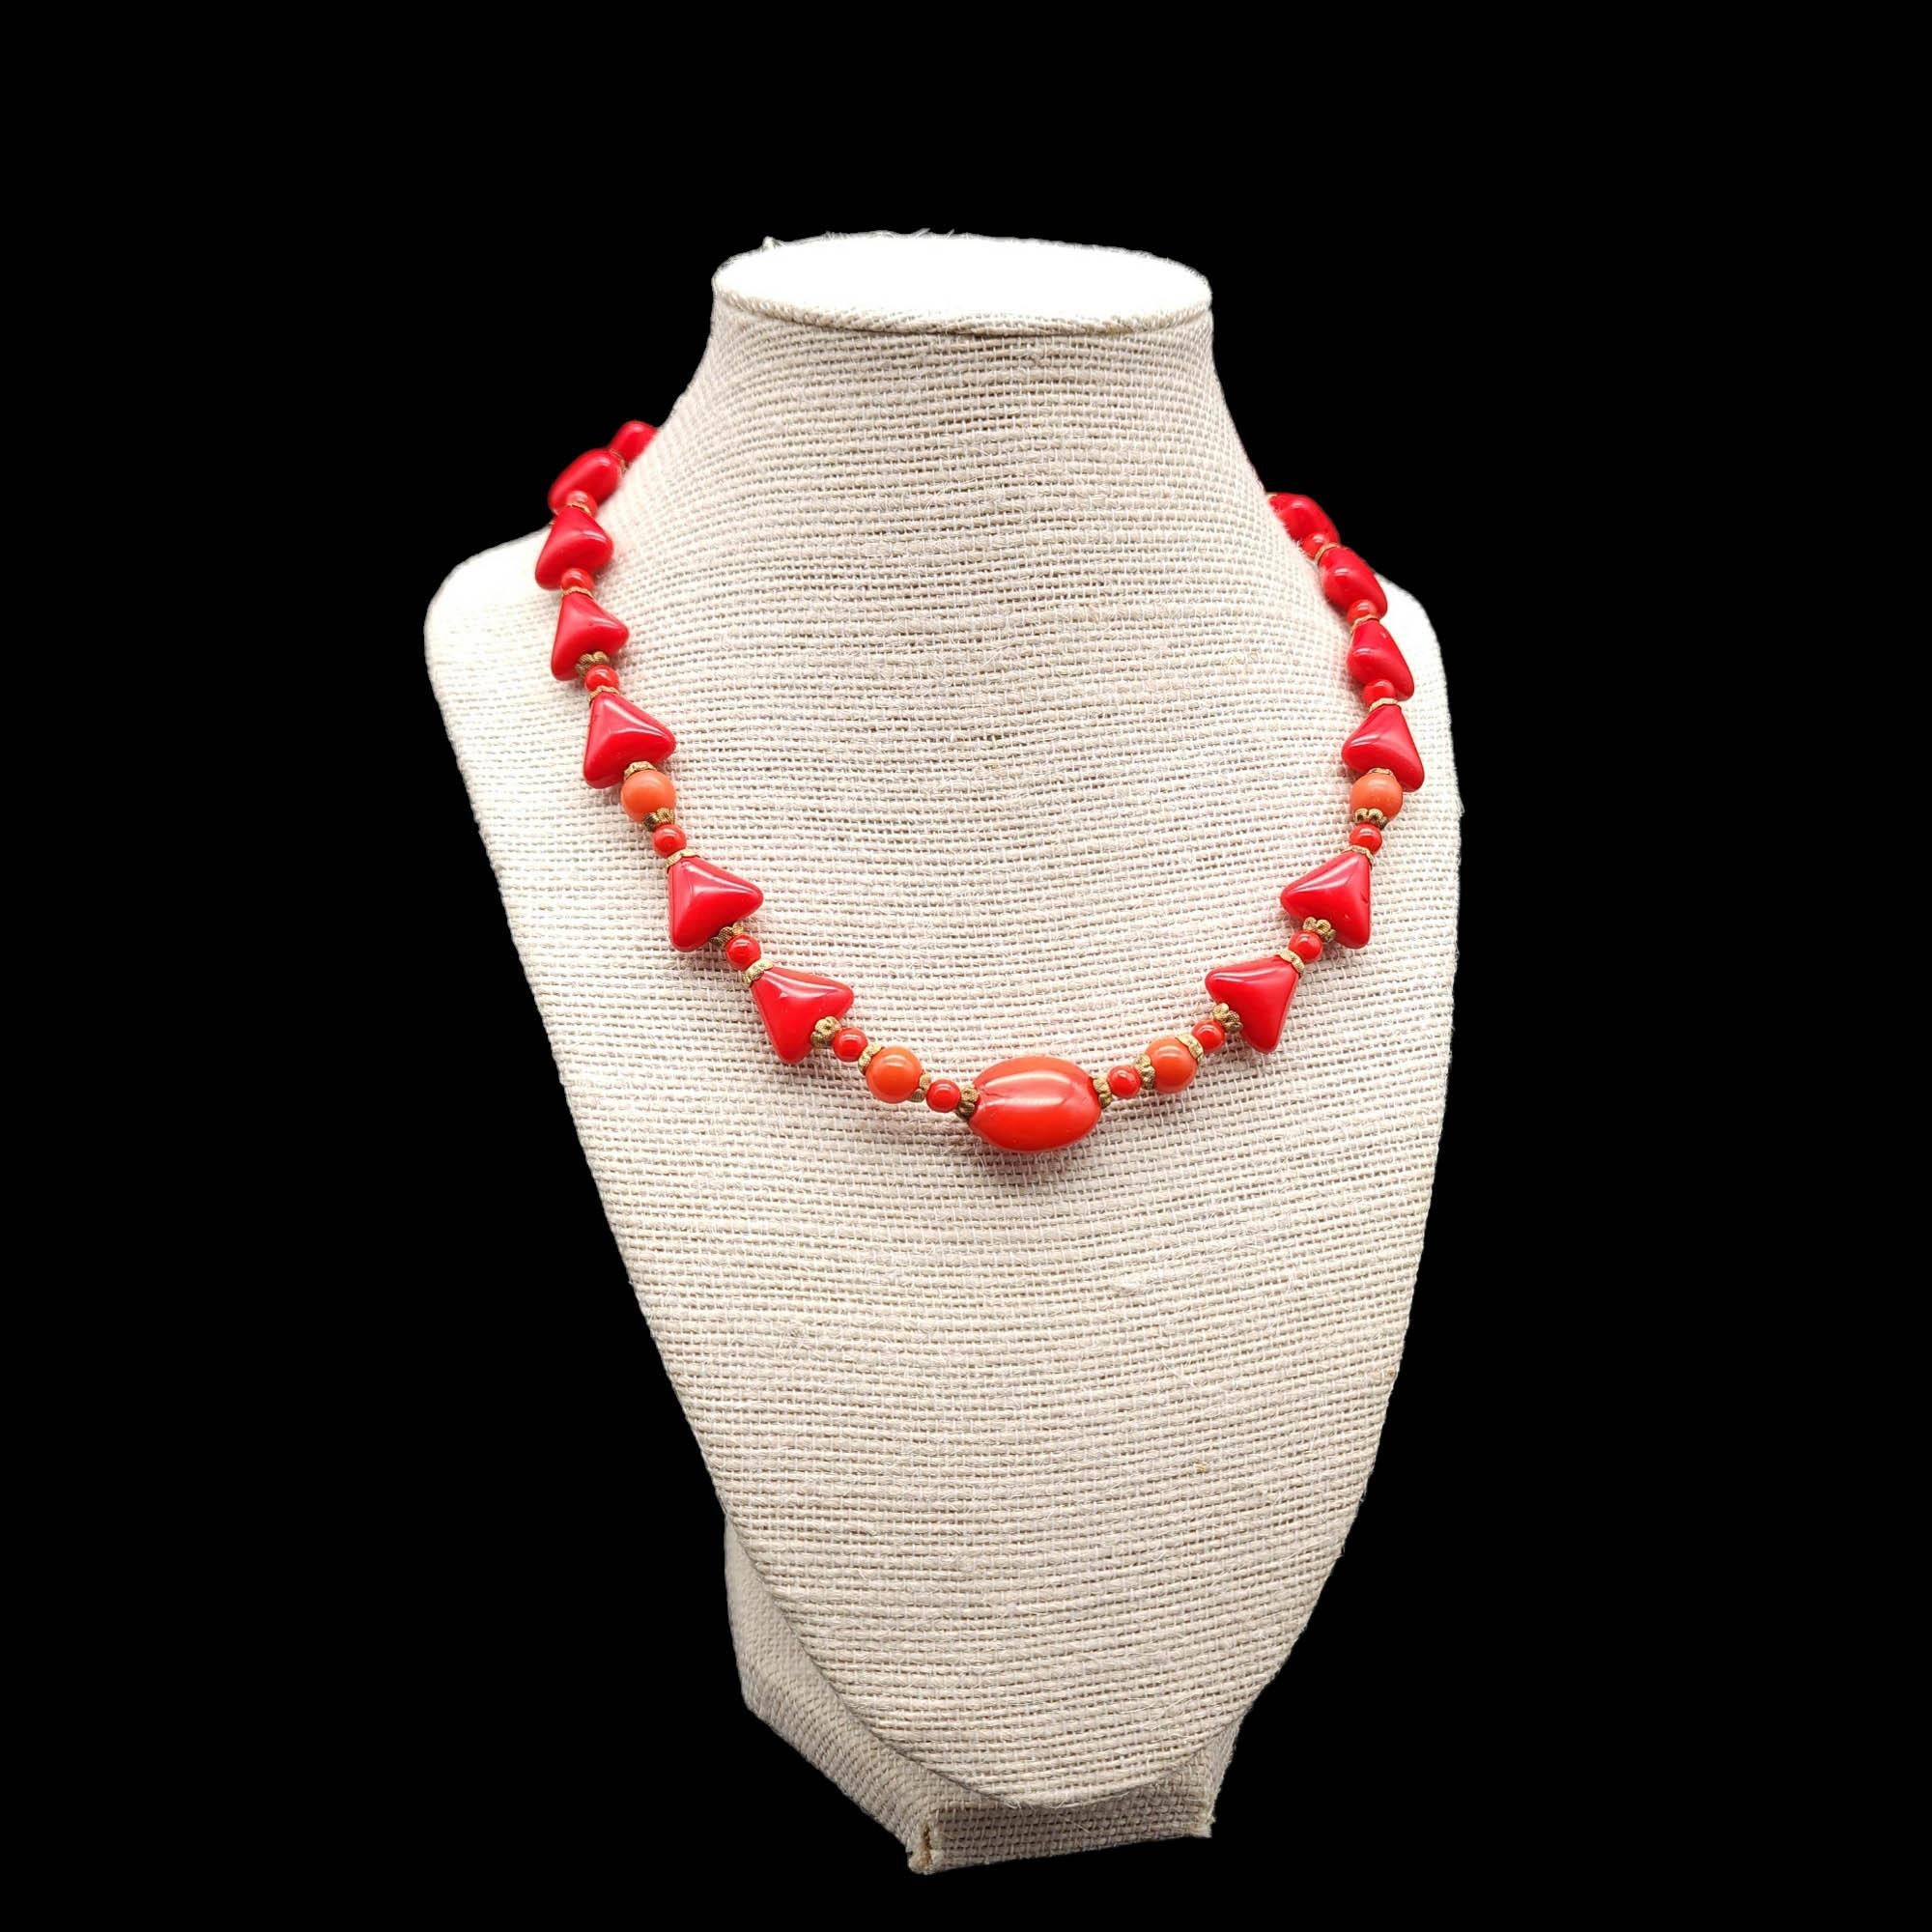 Necklace length: 42 cm / 16.5 inches - Collar / Choker Style

Step into a world of classic glamour with this red Lucite necklace. This exquisite piece features a striking combination of triangle and round beads, each delicately adorned with